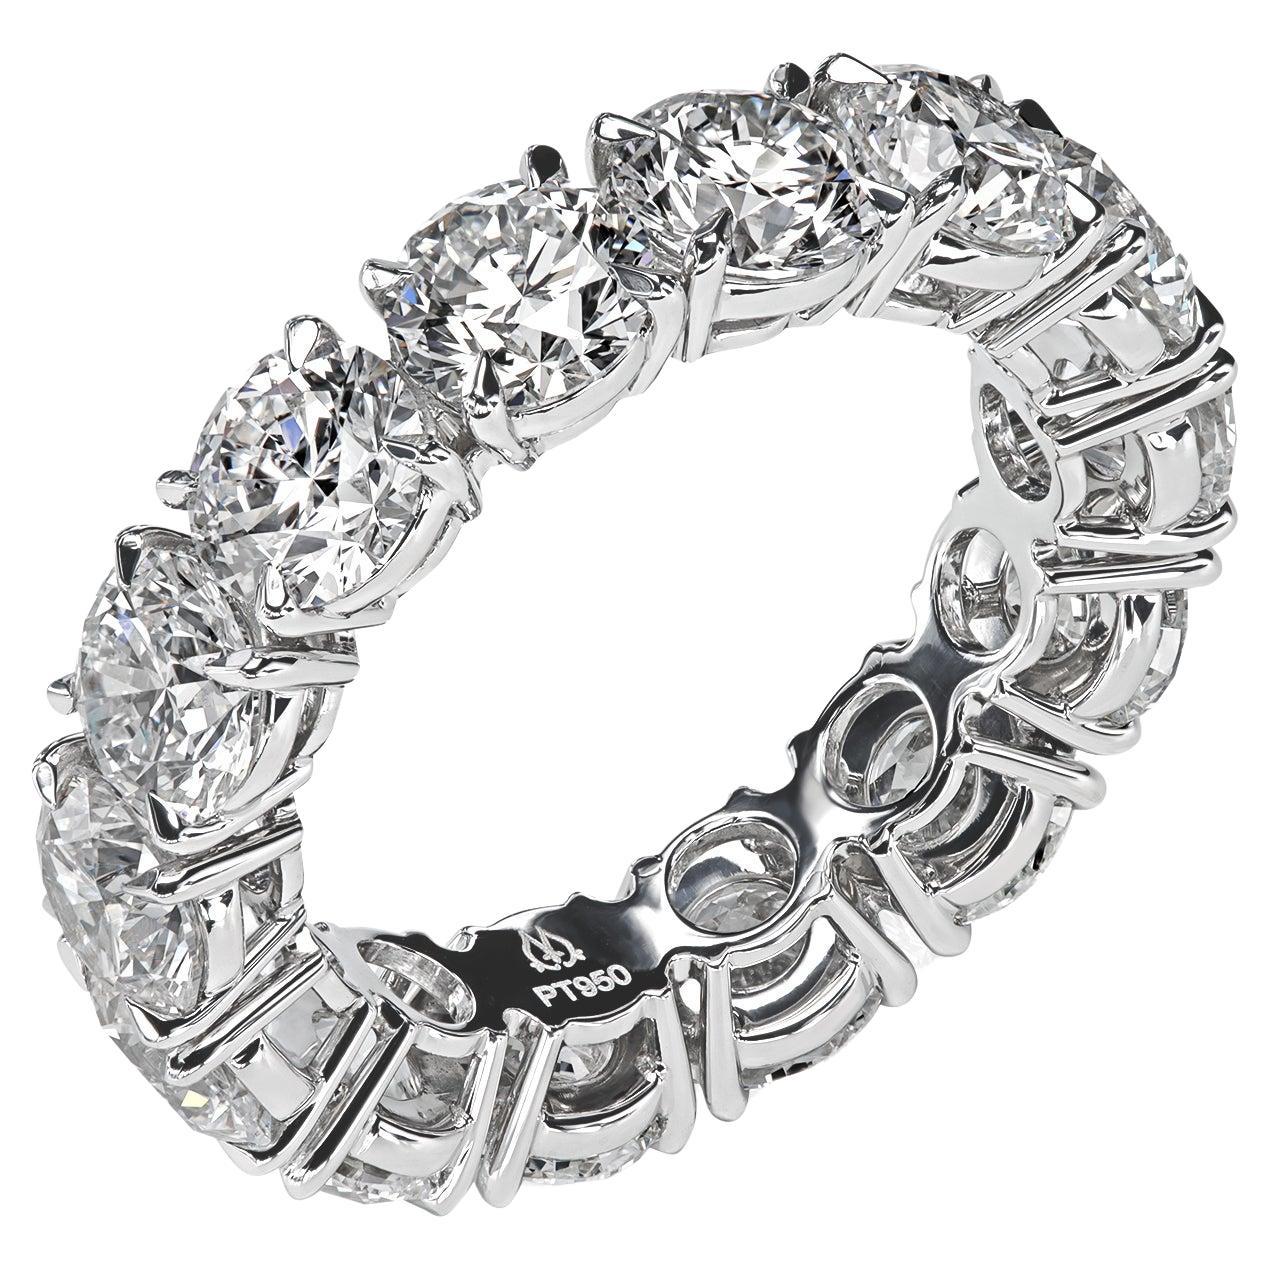 Leon Mege Platinum Eternity Band with Certified Round Diamonds